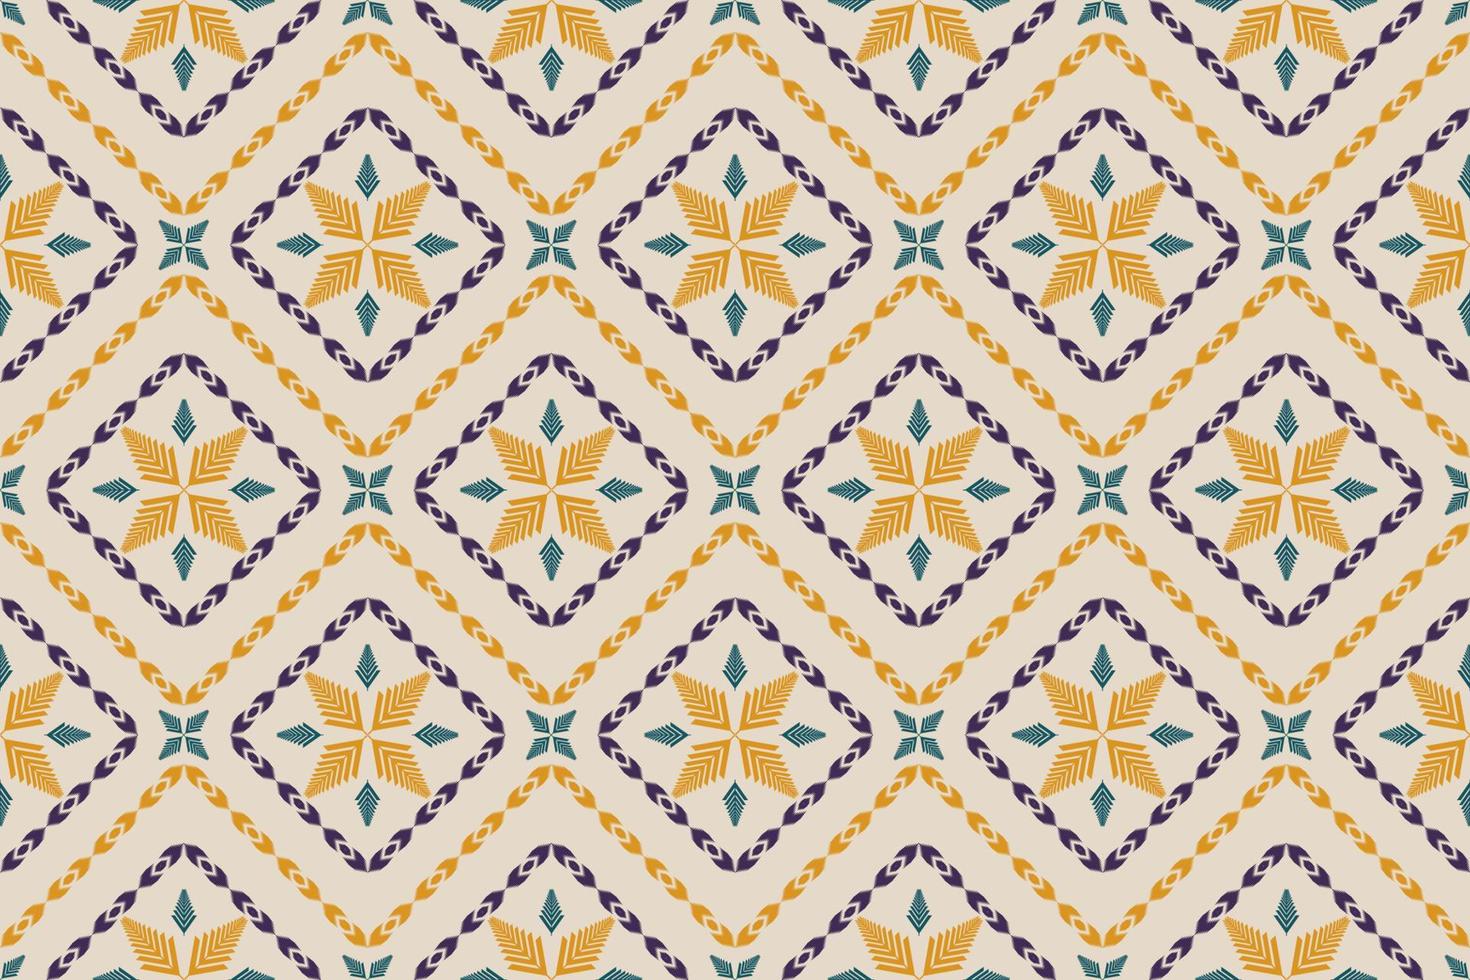 Ikat seamless pattern in tribal. Fabric ethnic pattern art. Flower decoration. Design for background, wallpaper, vector illustration, fabric, clothing, carpet, textile, batik, embroidery.